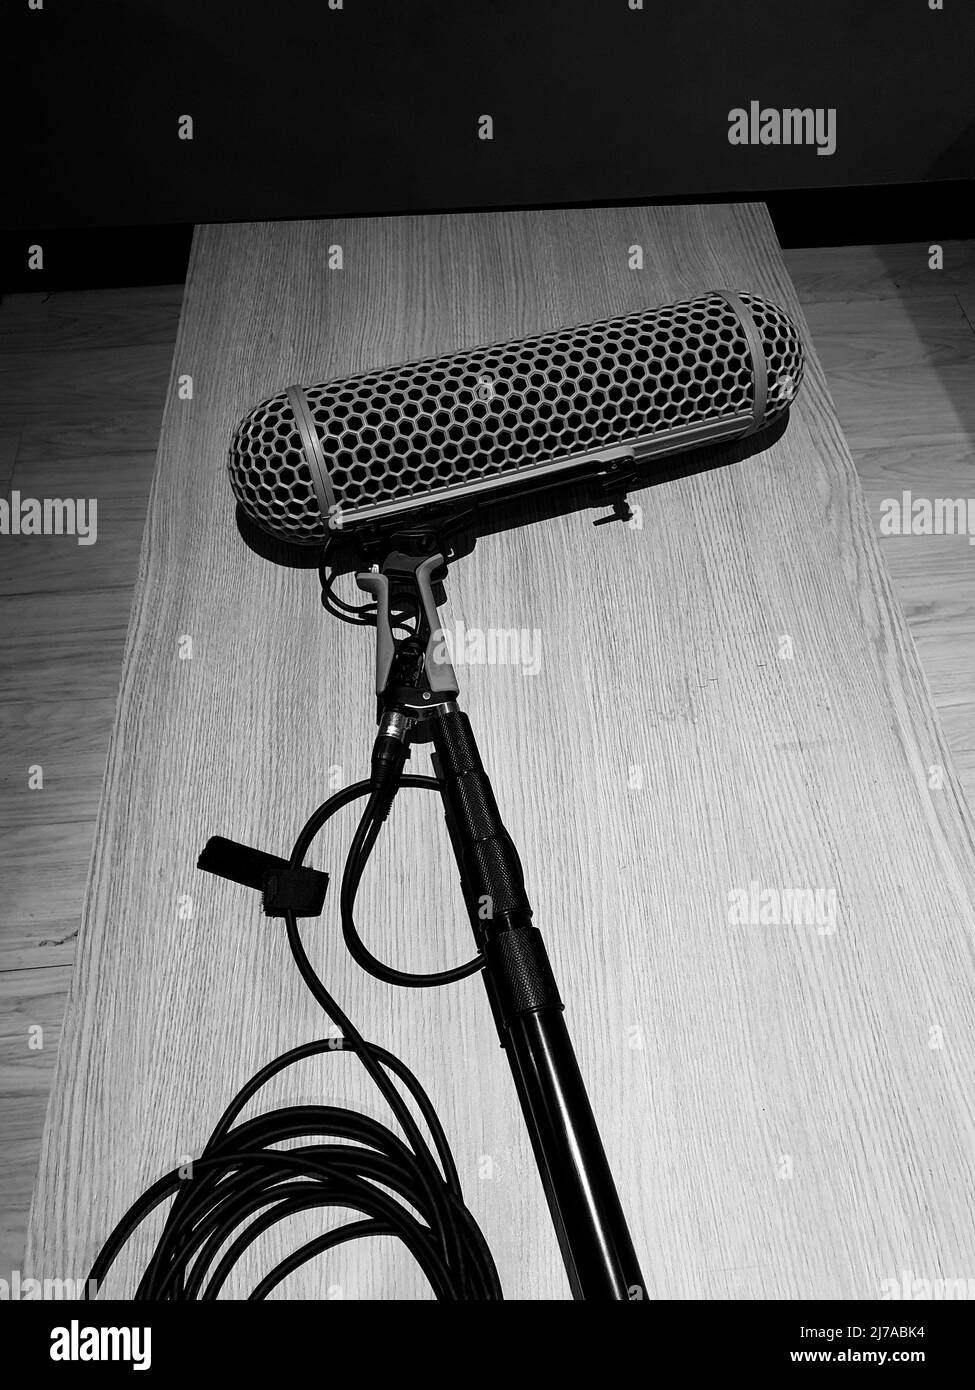 Boom Microphone or ambient mic for sound recording in video production. Boom microphones lay down on wood table after using in filming online movie. P Stock Photo